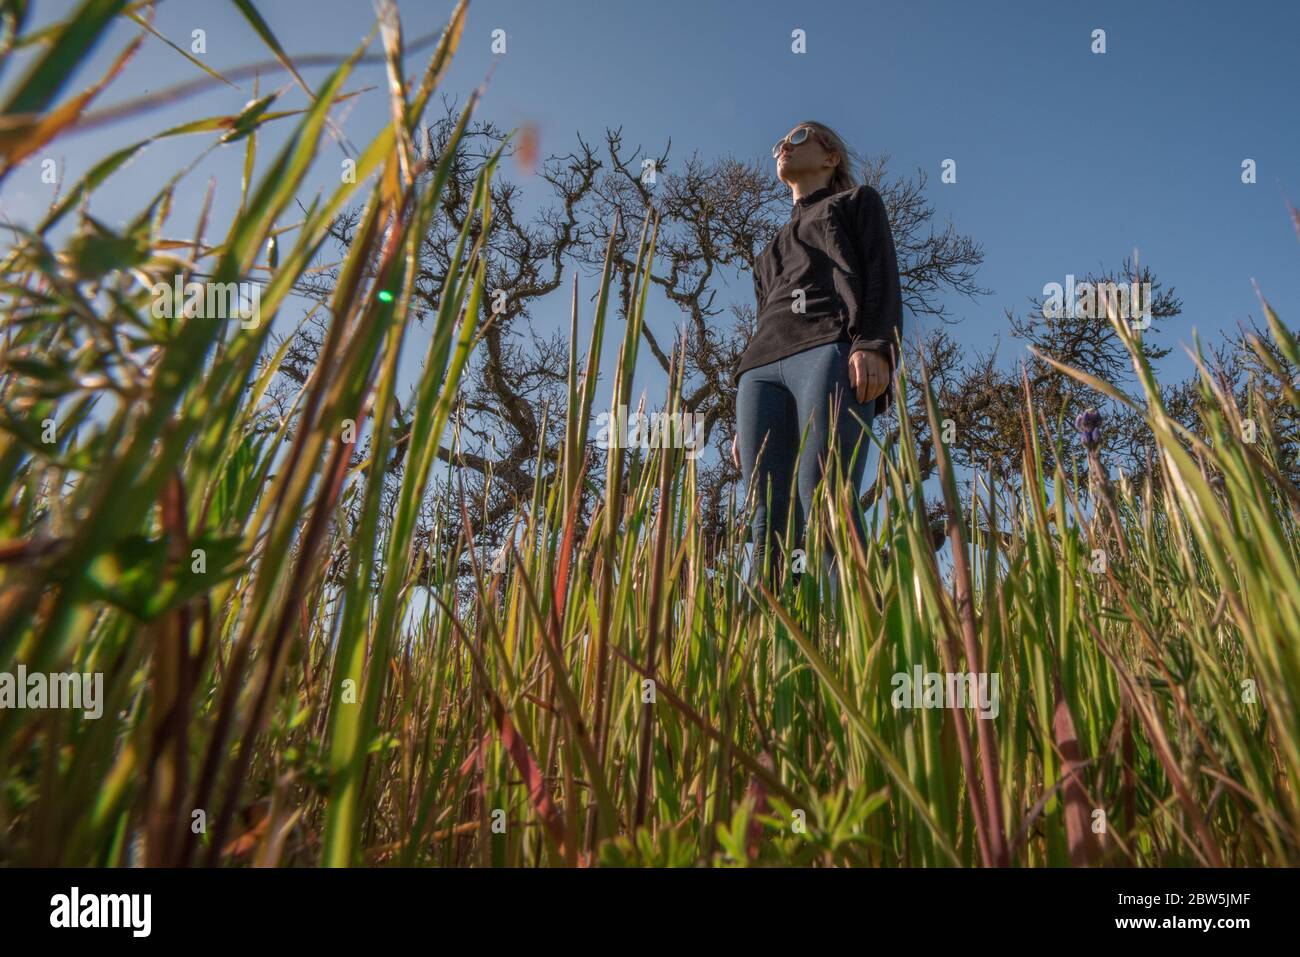 A blonde female standing in grass seen from the perspective of a bug in the grass. Unusual angle from below. Stock Photo